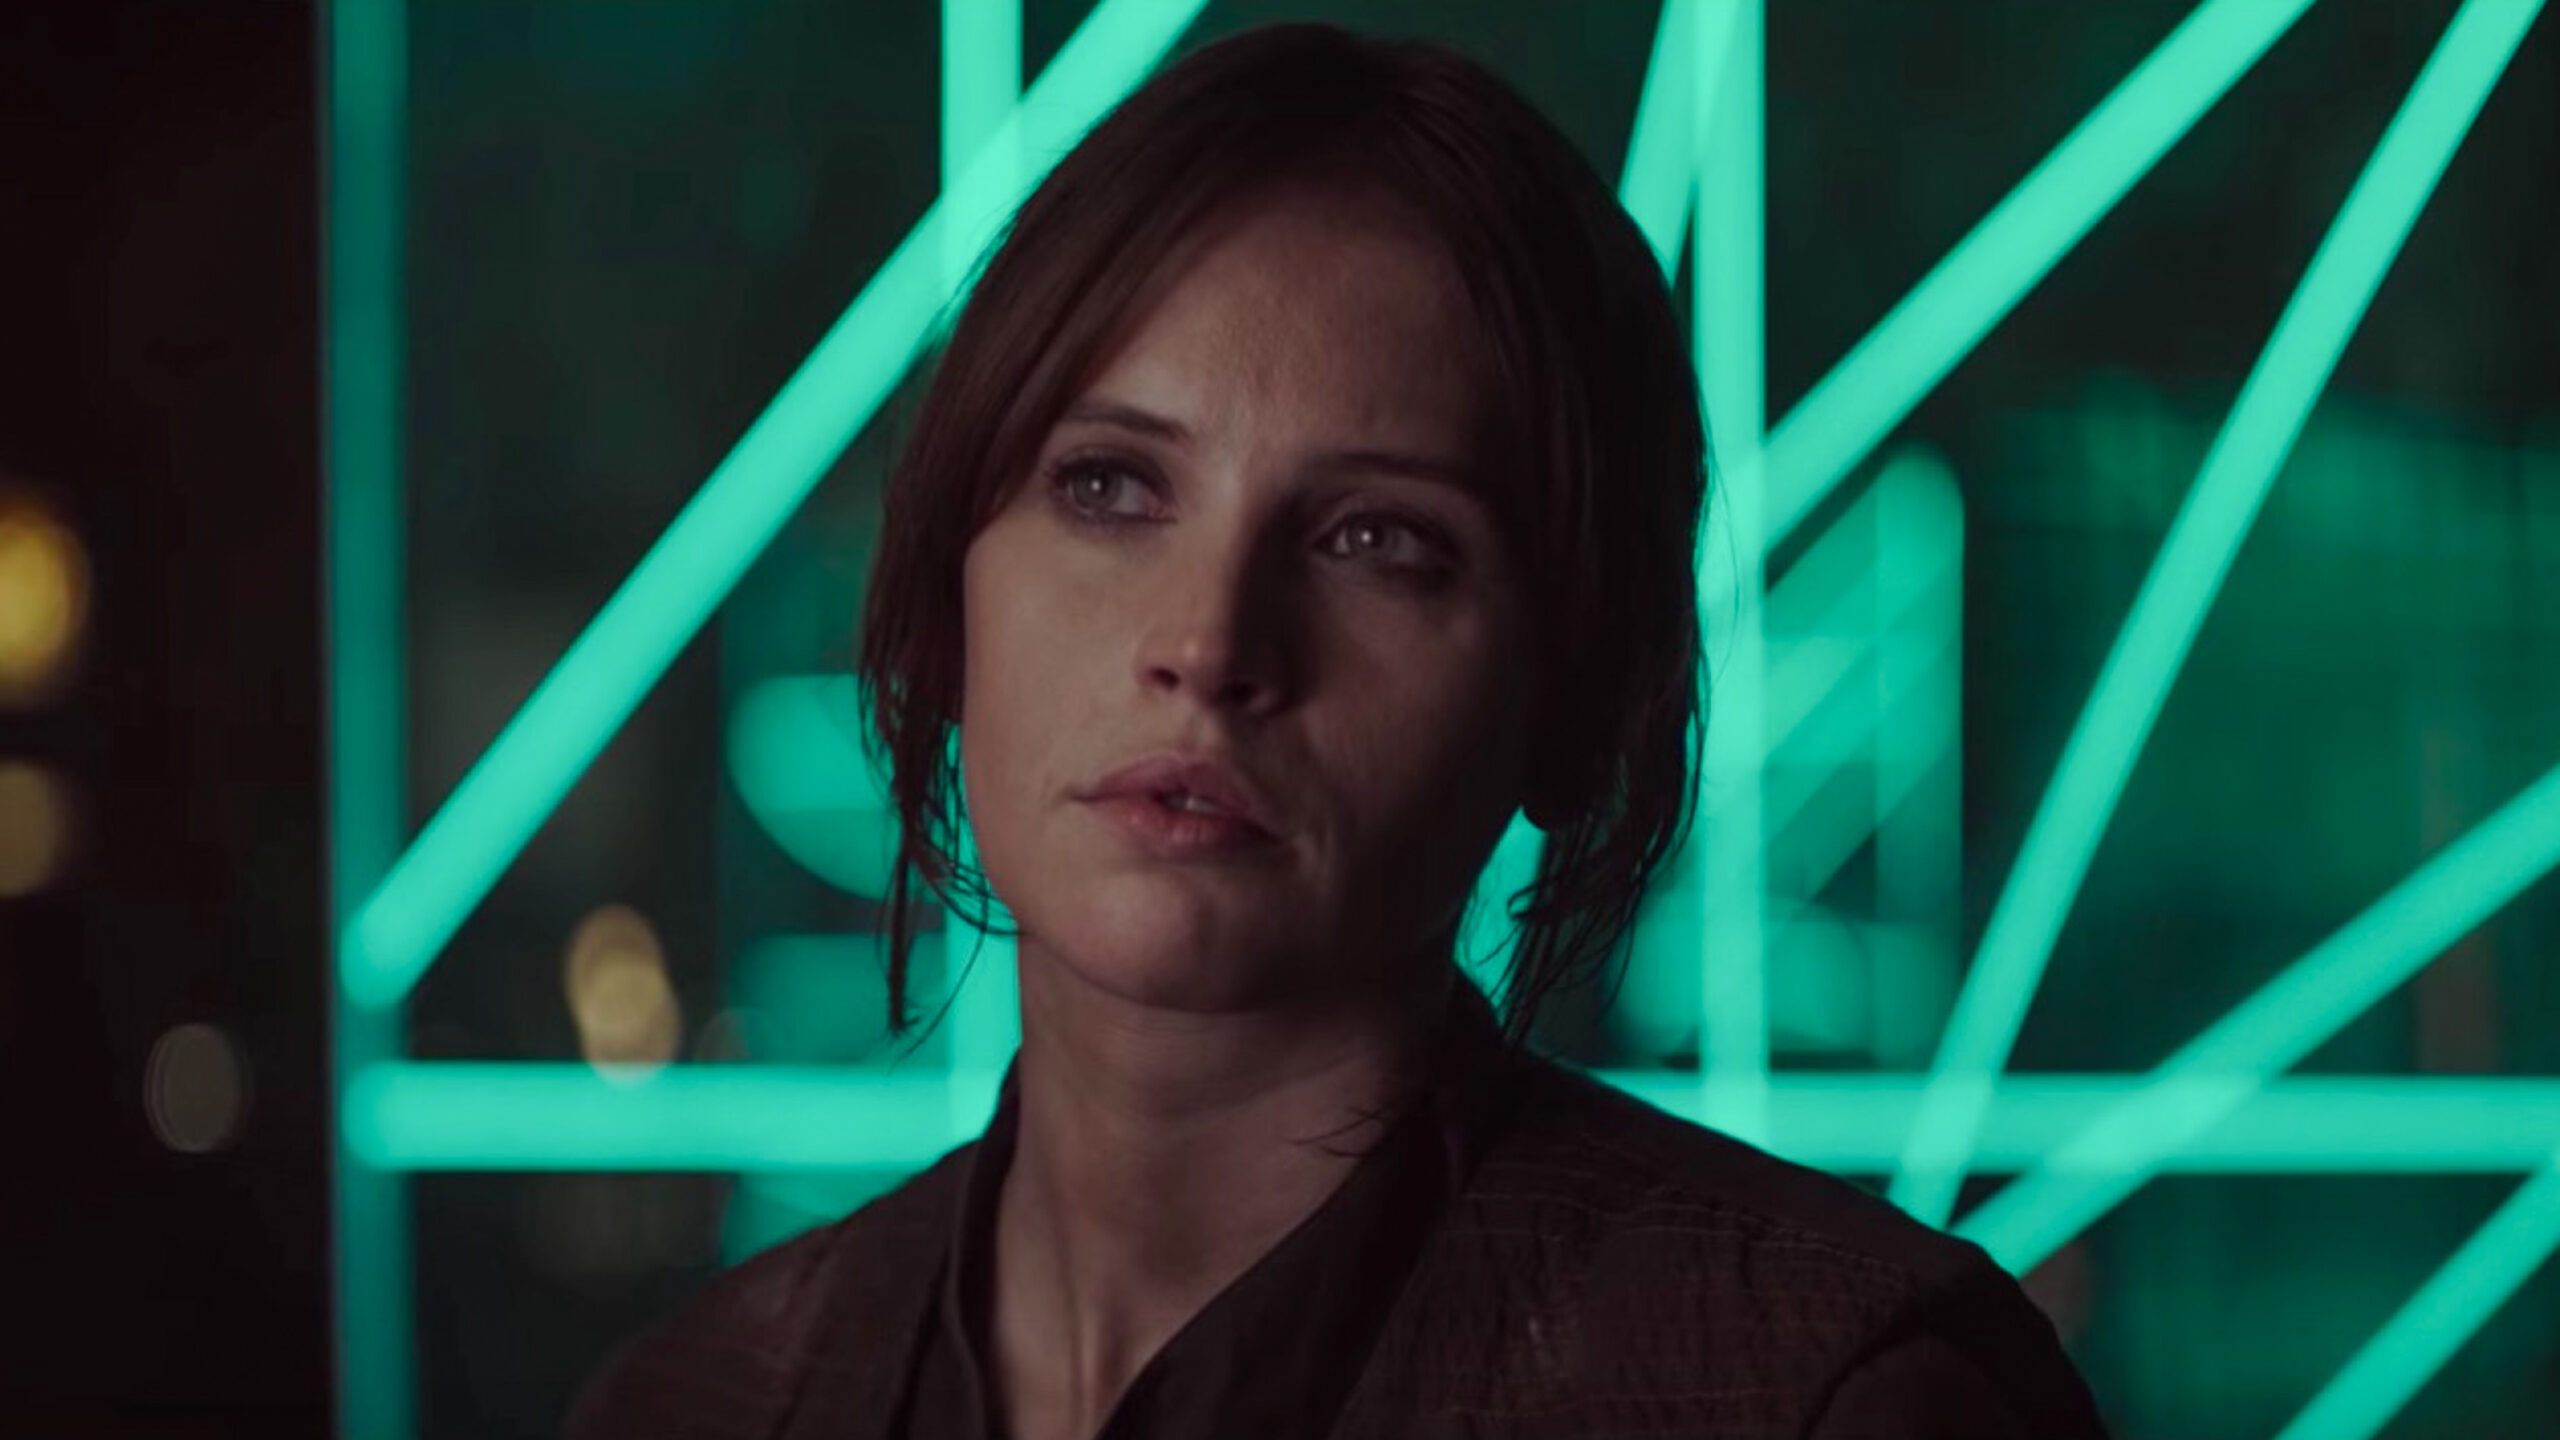 Movie Reviews: What critics are saying about ‘Rogue One’